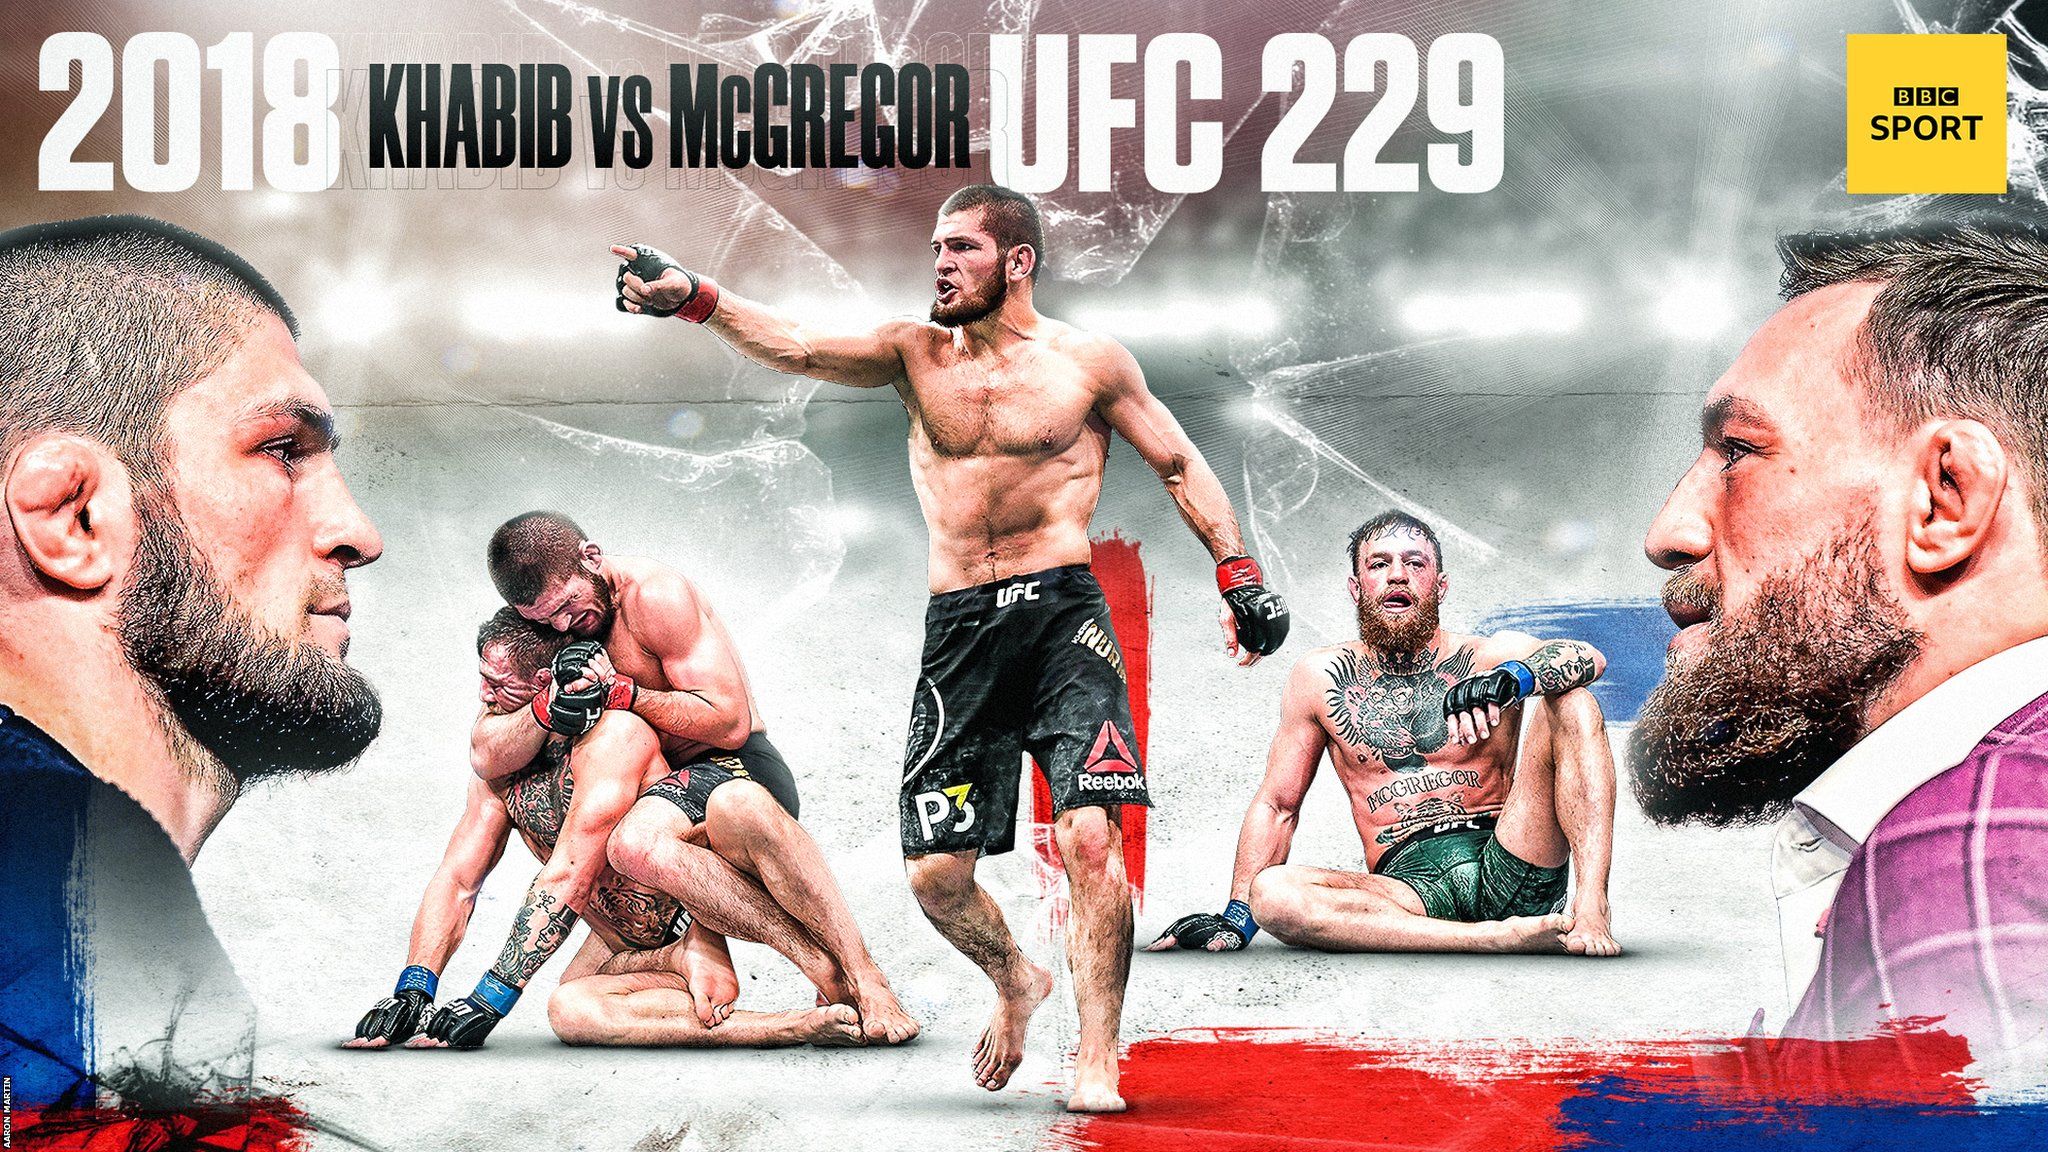 Graphic showing the best moments of Conor McGregor's rivalry with Khabib Nurmagomedov